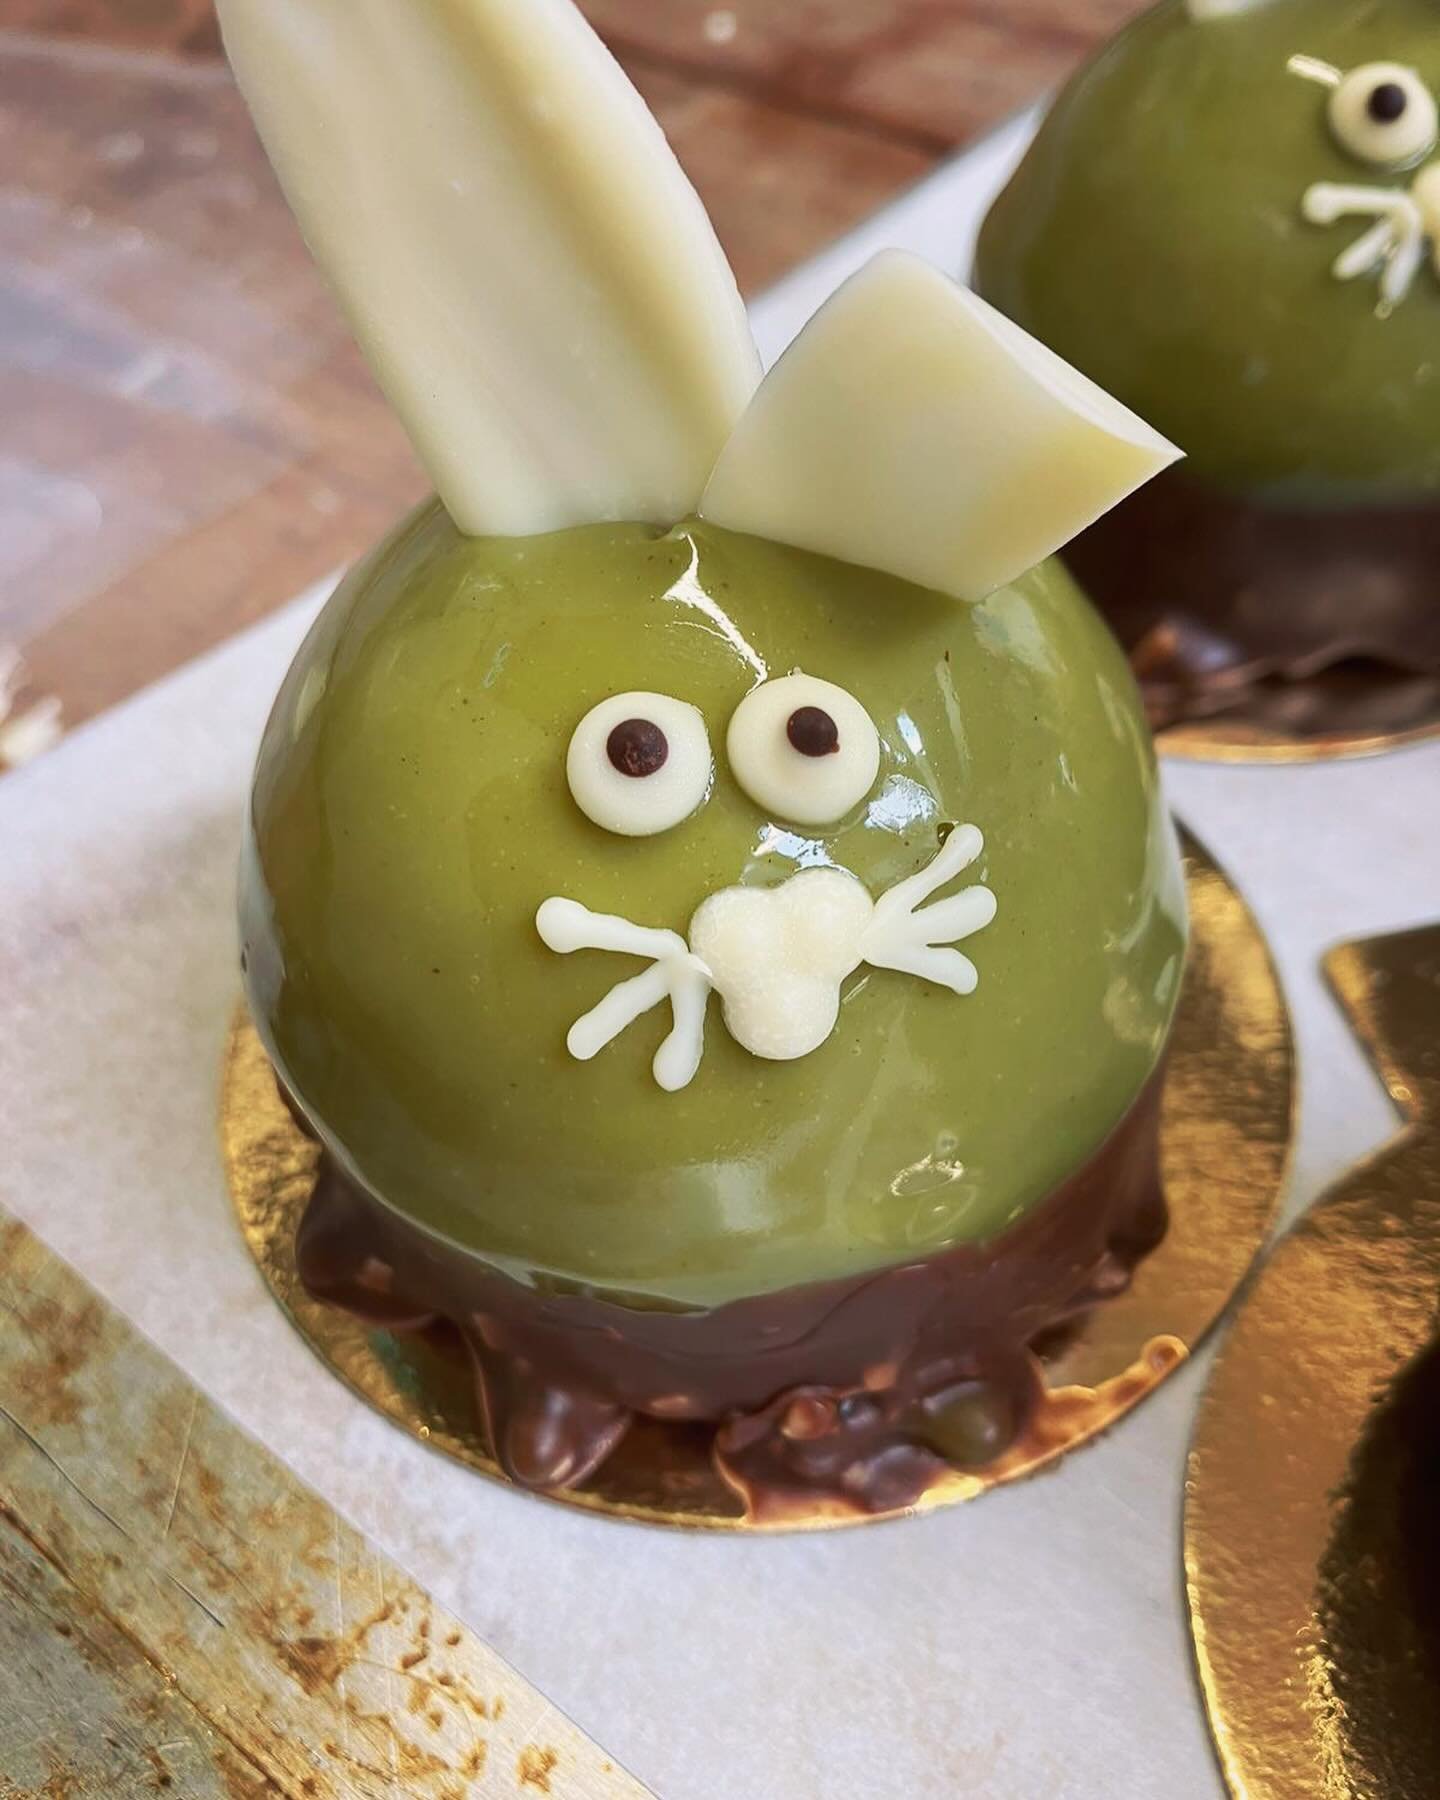 Happy Easter from Boulangerie Jade! 🐣 

Want to try these guys? 🐰

Pistachio mousse rabbit with chocolate fudge sponge (GF), dipped in almond chocolate and only &pound;5.60! 😍

We&rsquo;re open 8-5 Easter Sunday and Monday. Come and grab a treat! 